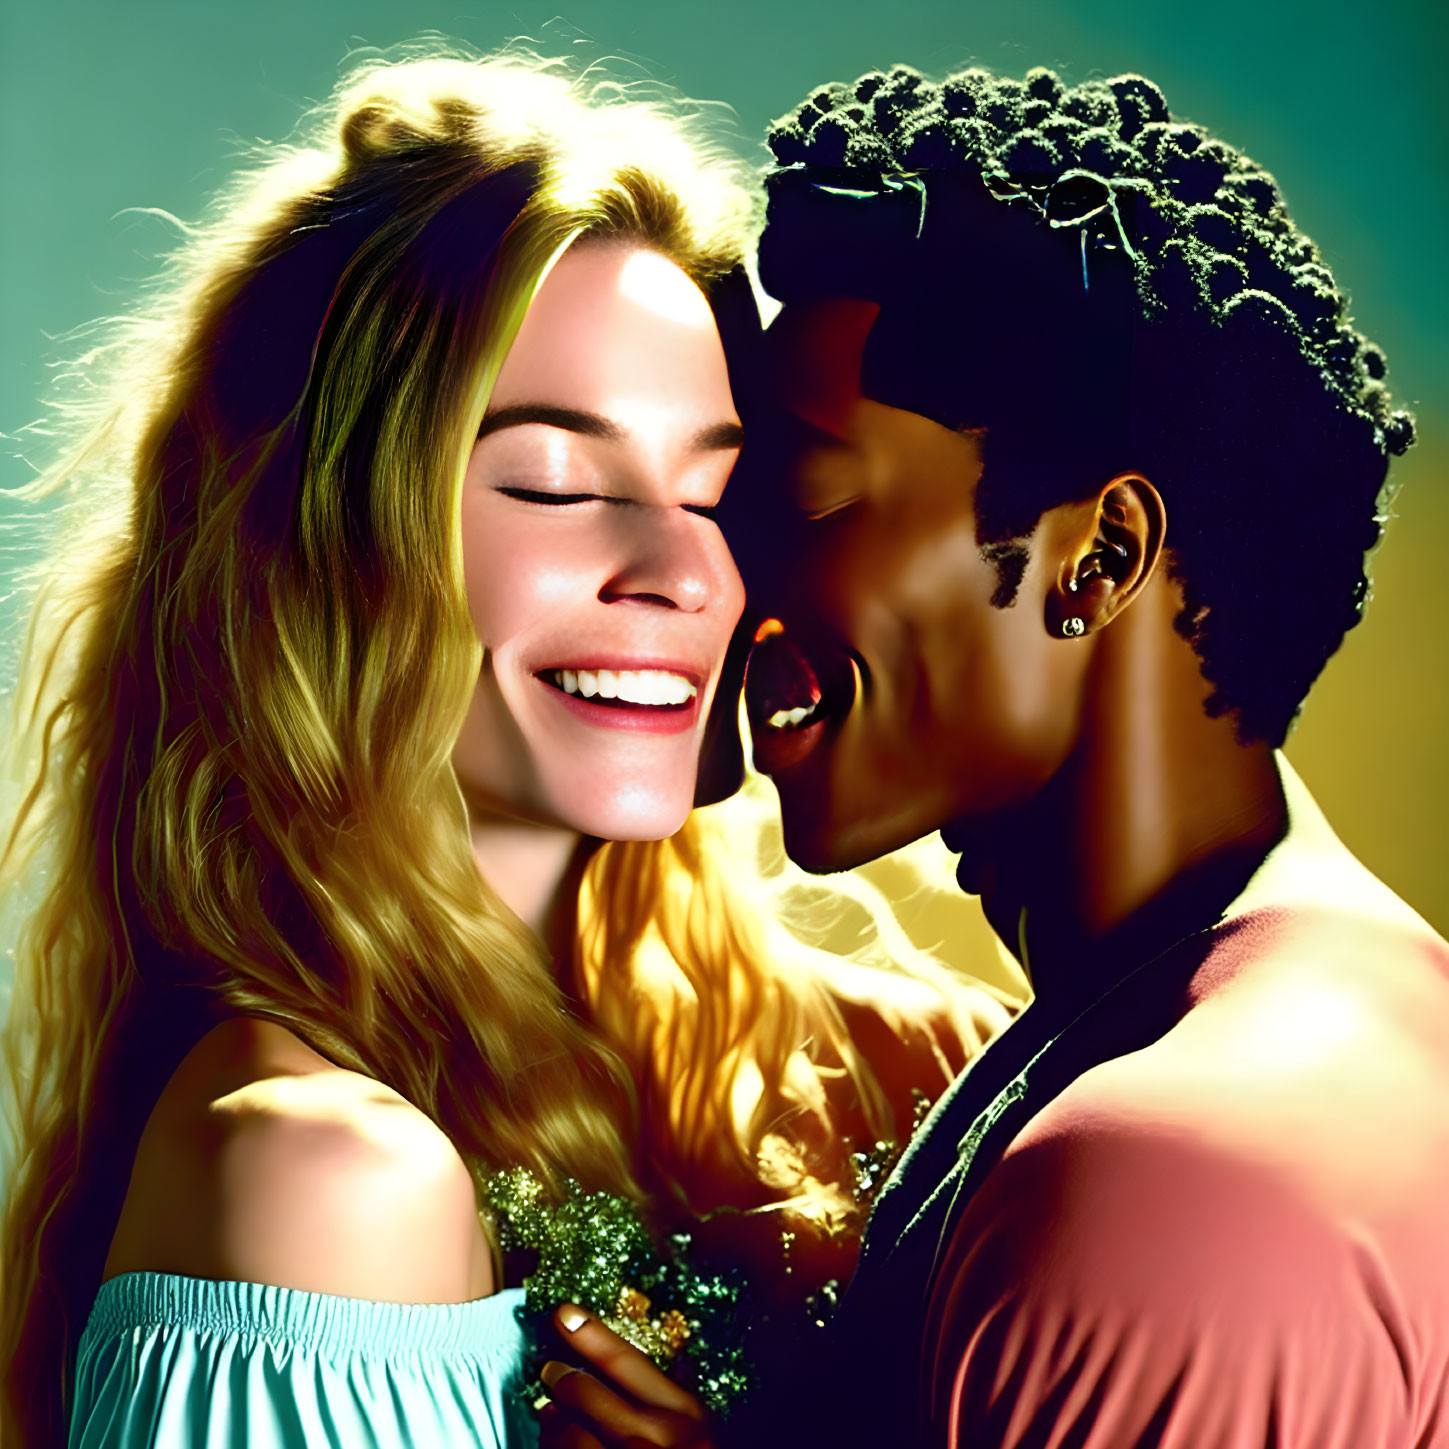 Man and woman smiling closely with foreheads touching in warm light